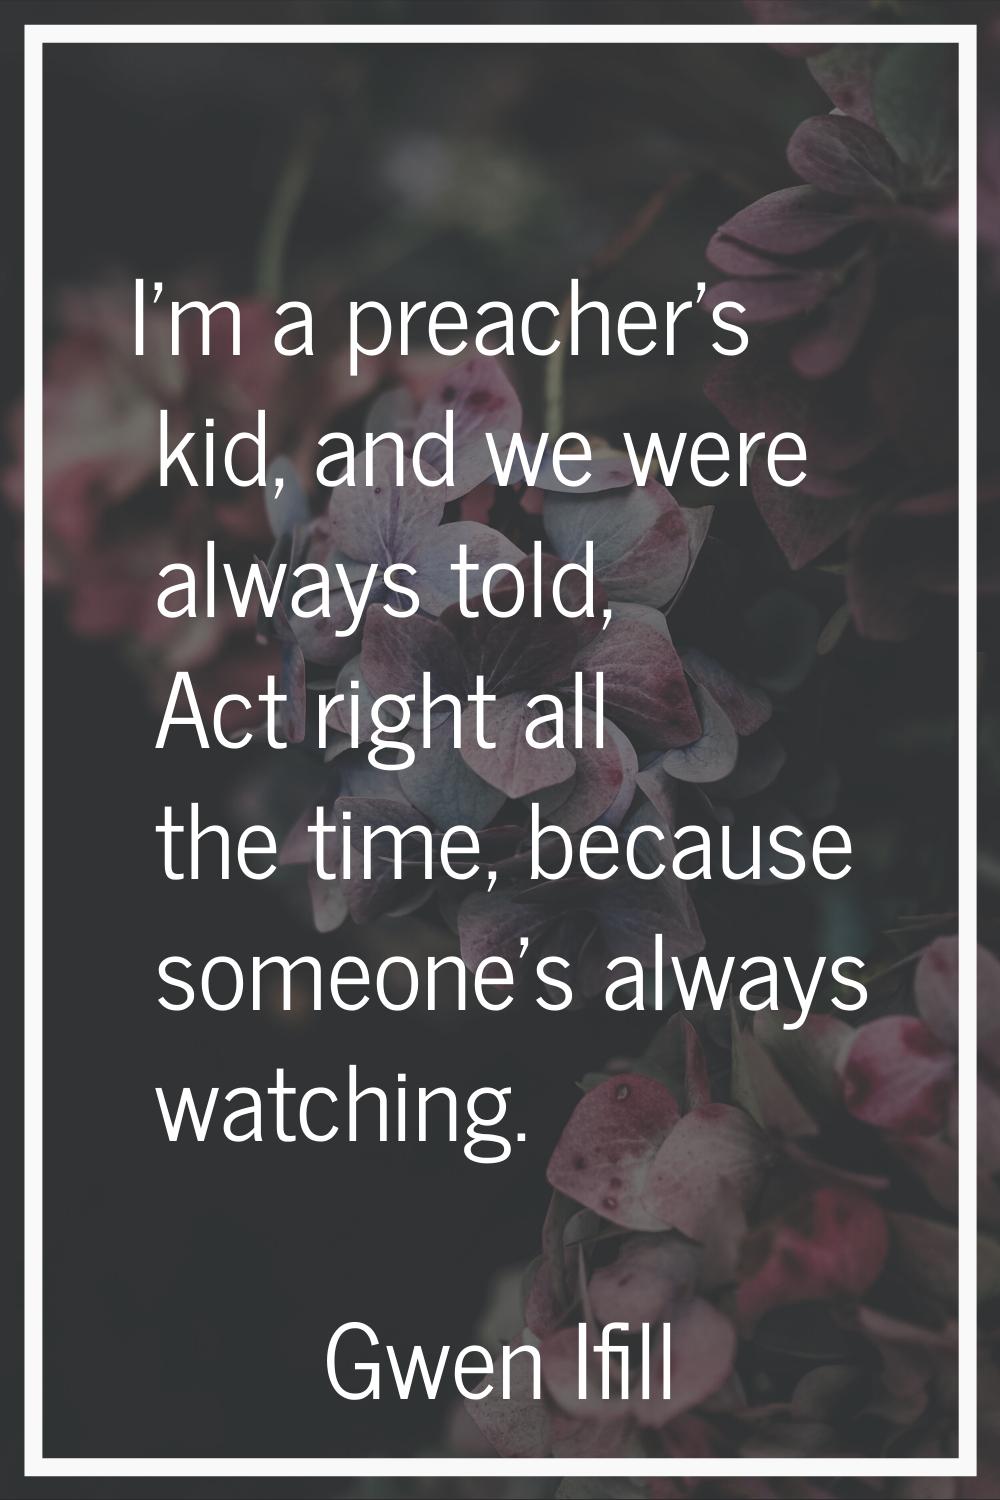 I'm a preacher's kid, and we were always told, Act right all the time, because someone's always wat